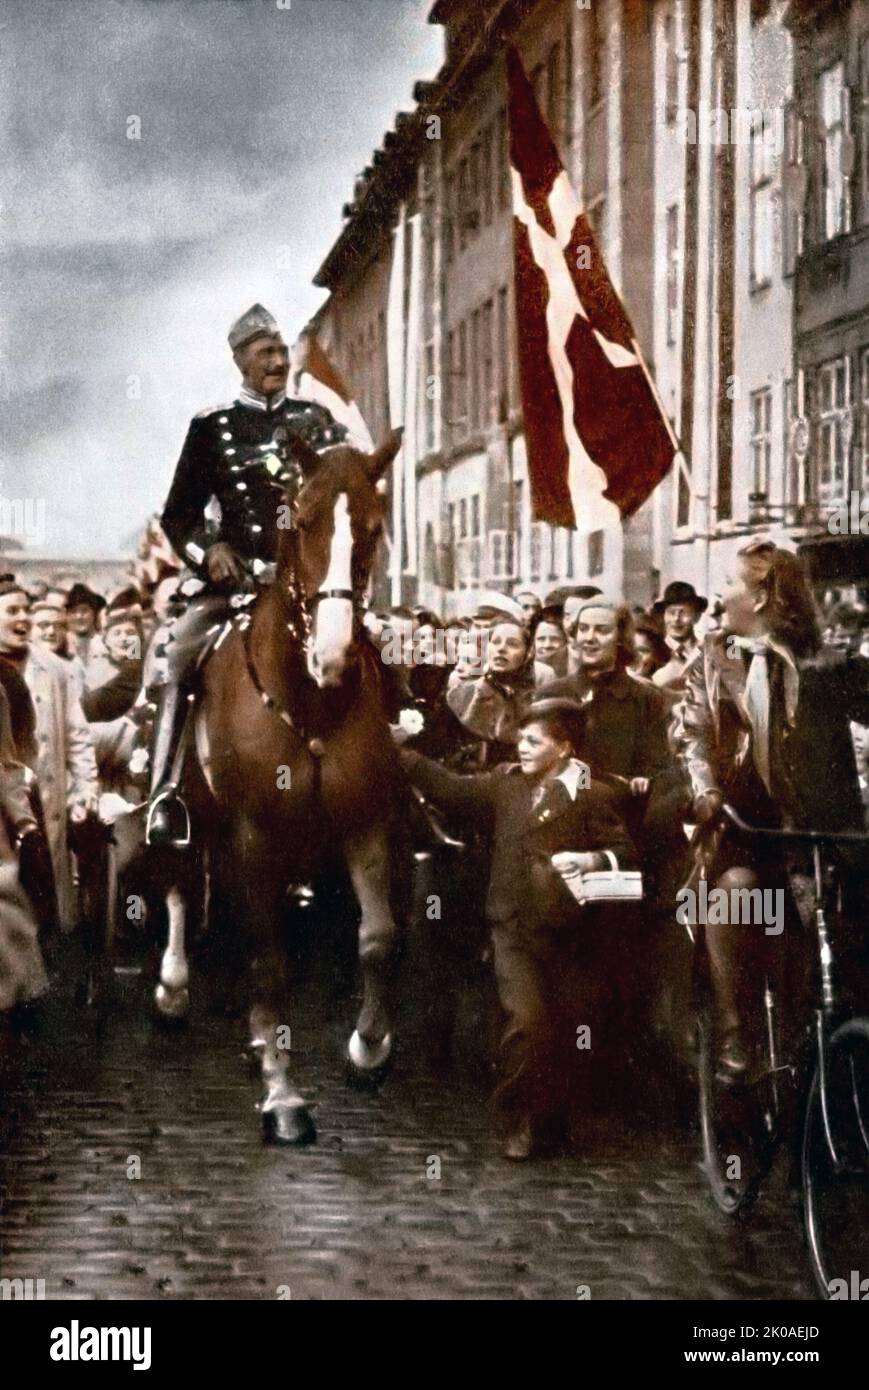 Christian X (1870 - 20 April 1947) was King of Denmark from 1912 to his death in 1947, and the only King of Iceland as Kristjan X, in the form of a personal union rather than a real union between 1918 and 1944. King Christian X rode through Copenhagen on his 70th birthday, 26 September 1940, during the German occupation of Denmark Stock Photo